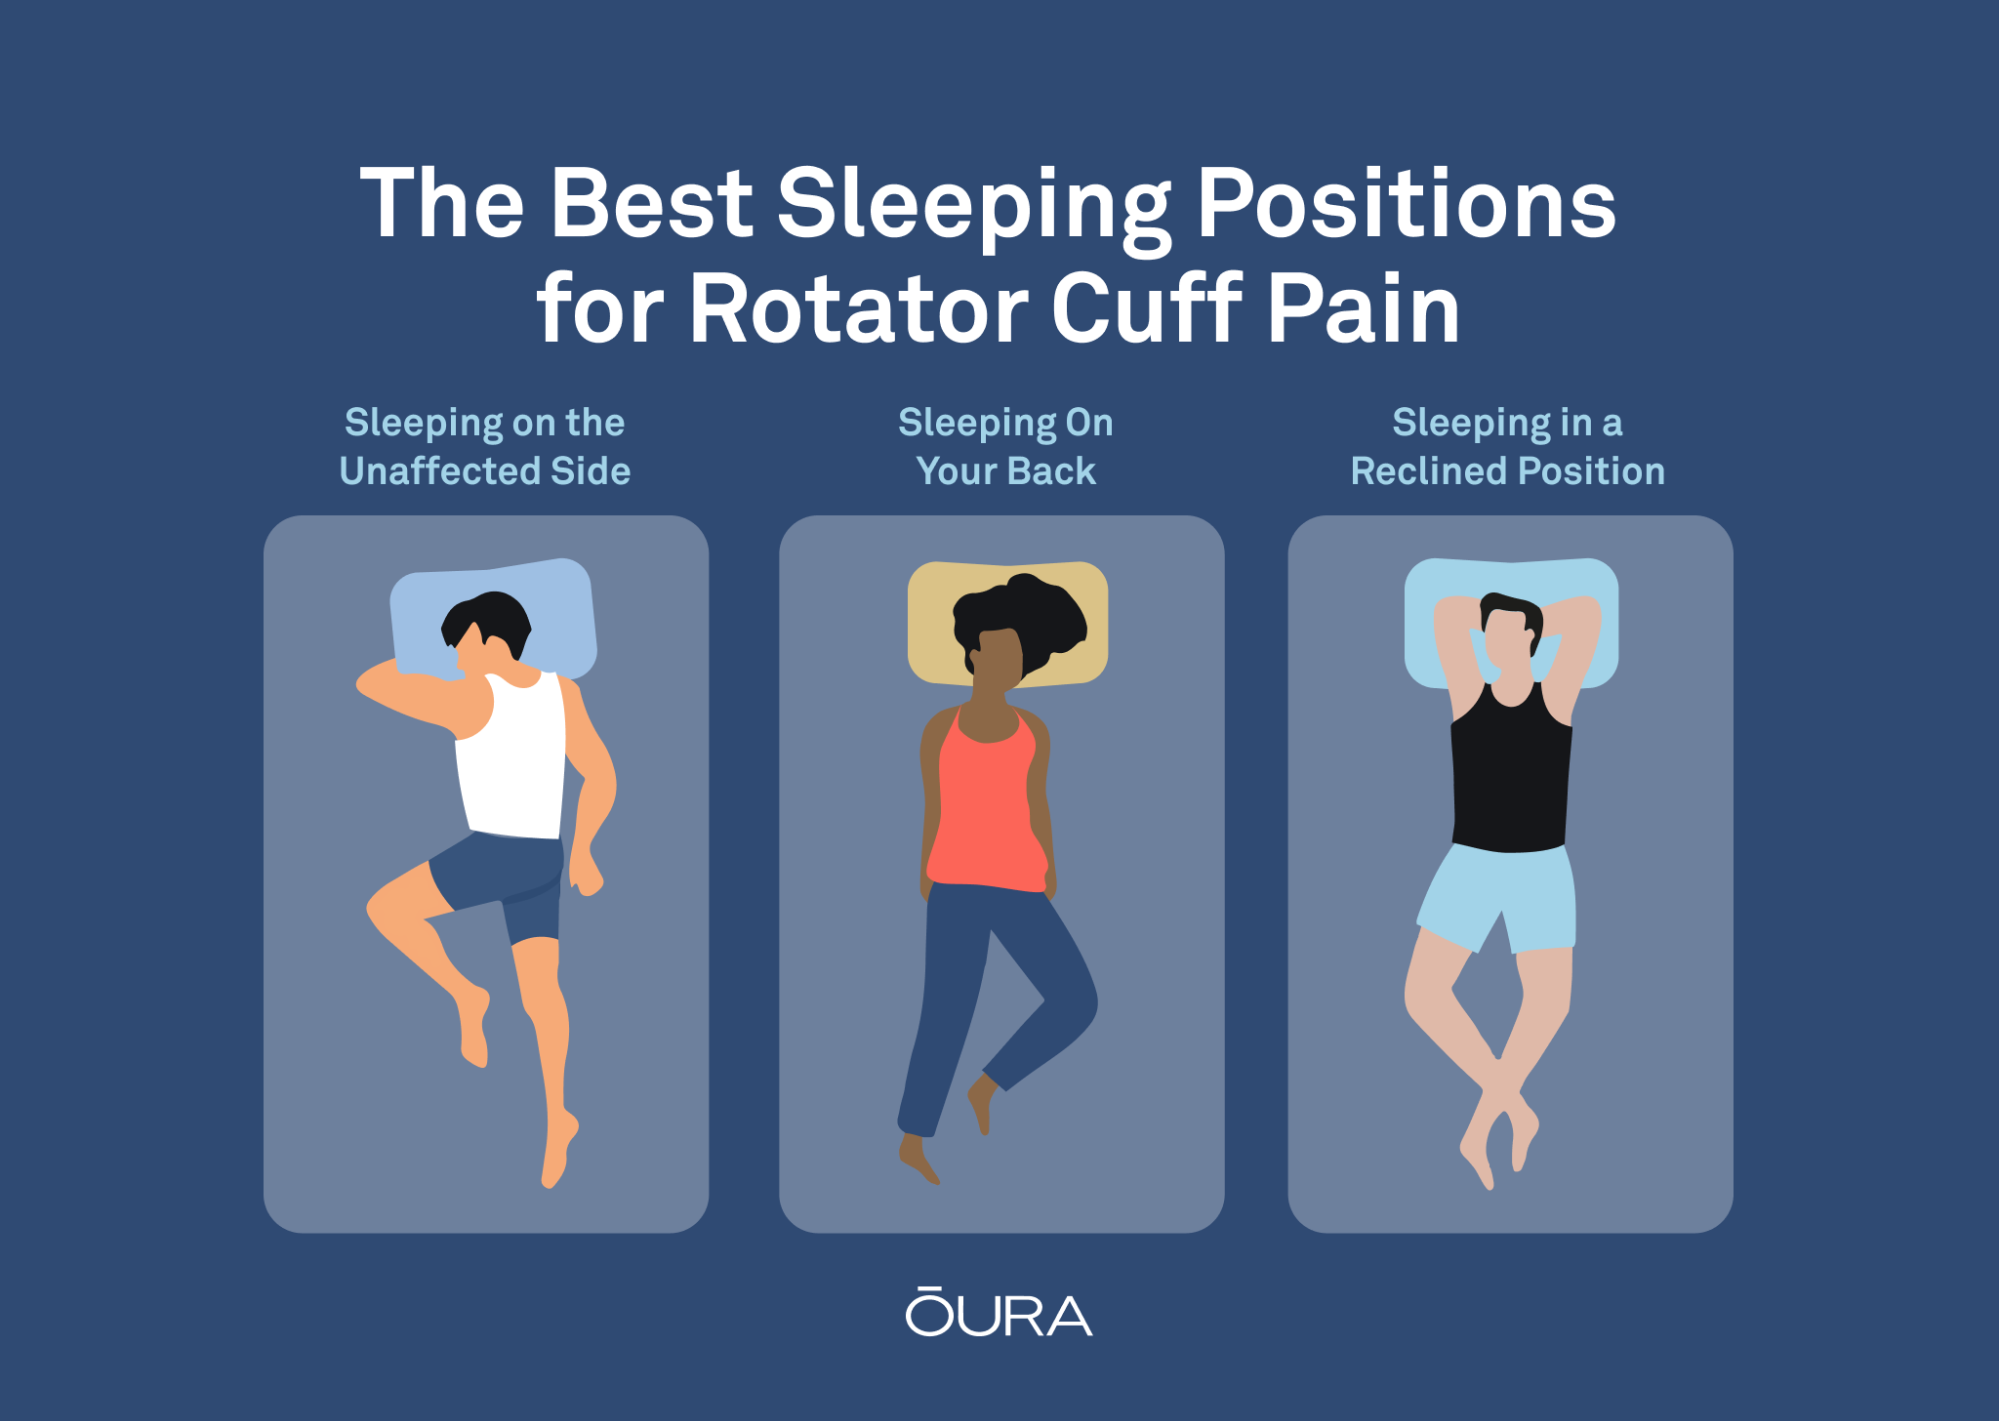 Graphic: The Best Sleeping Positions for Rotator Cuff Pain